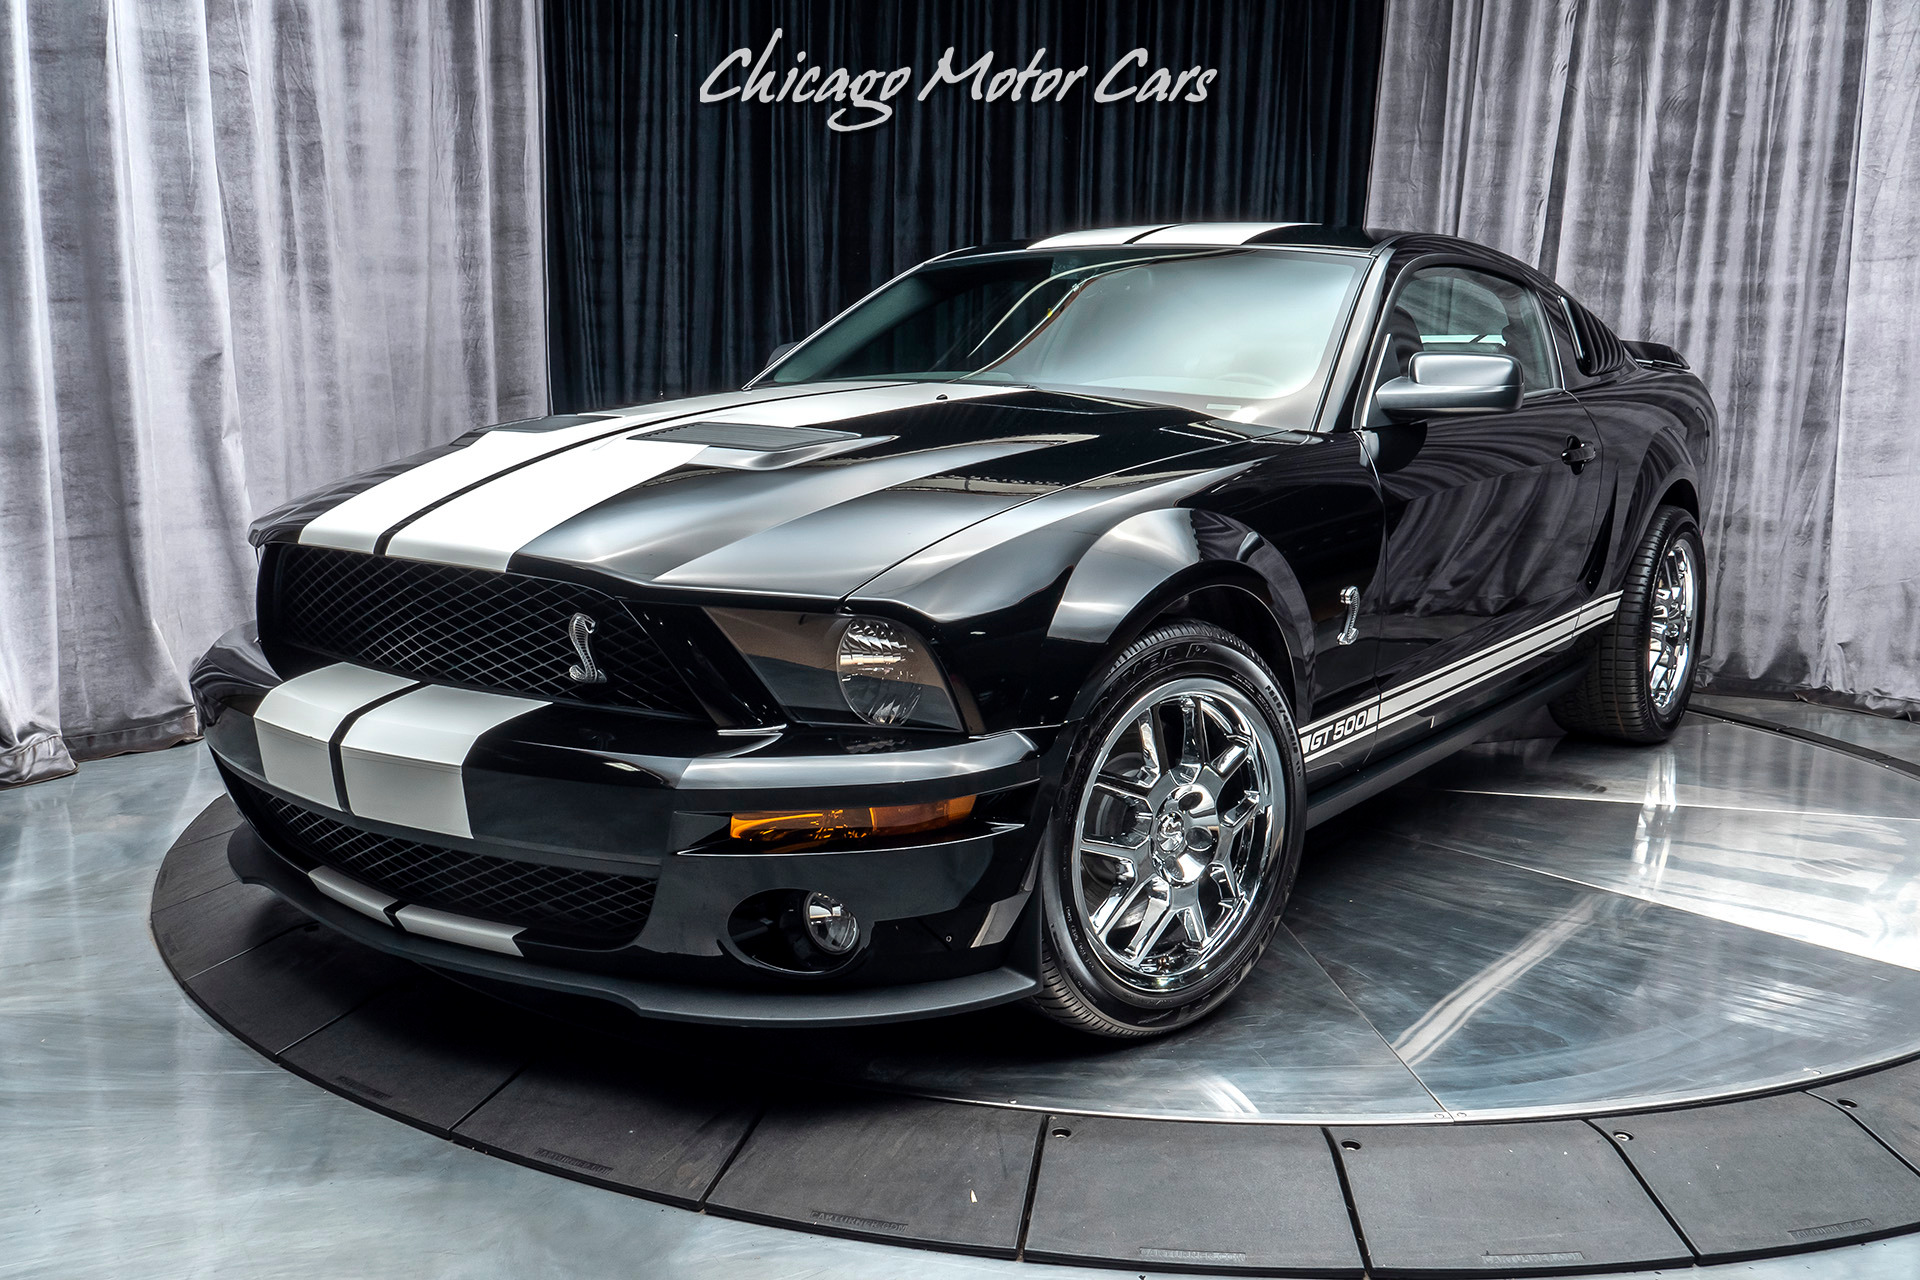 Used-2007-Ford-Mustang-Shelby-GT500-Coupe-COLLECTORS-QUALITY-ONLY-431-MILES-500HP